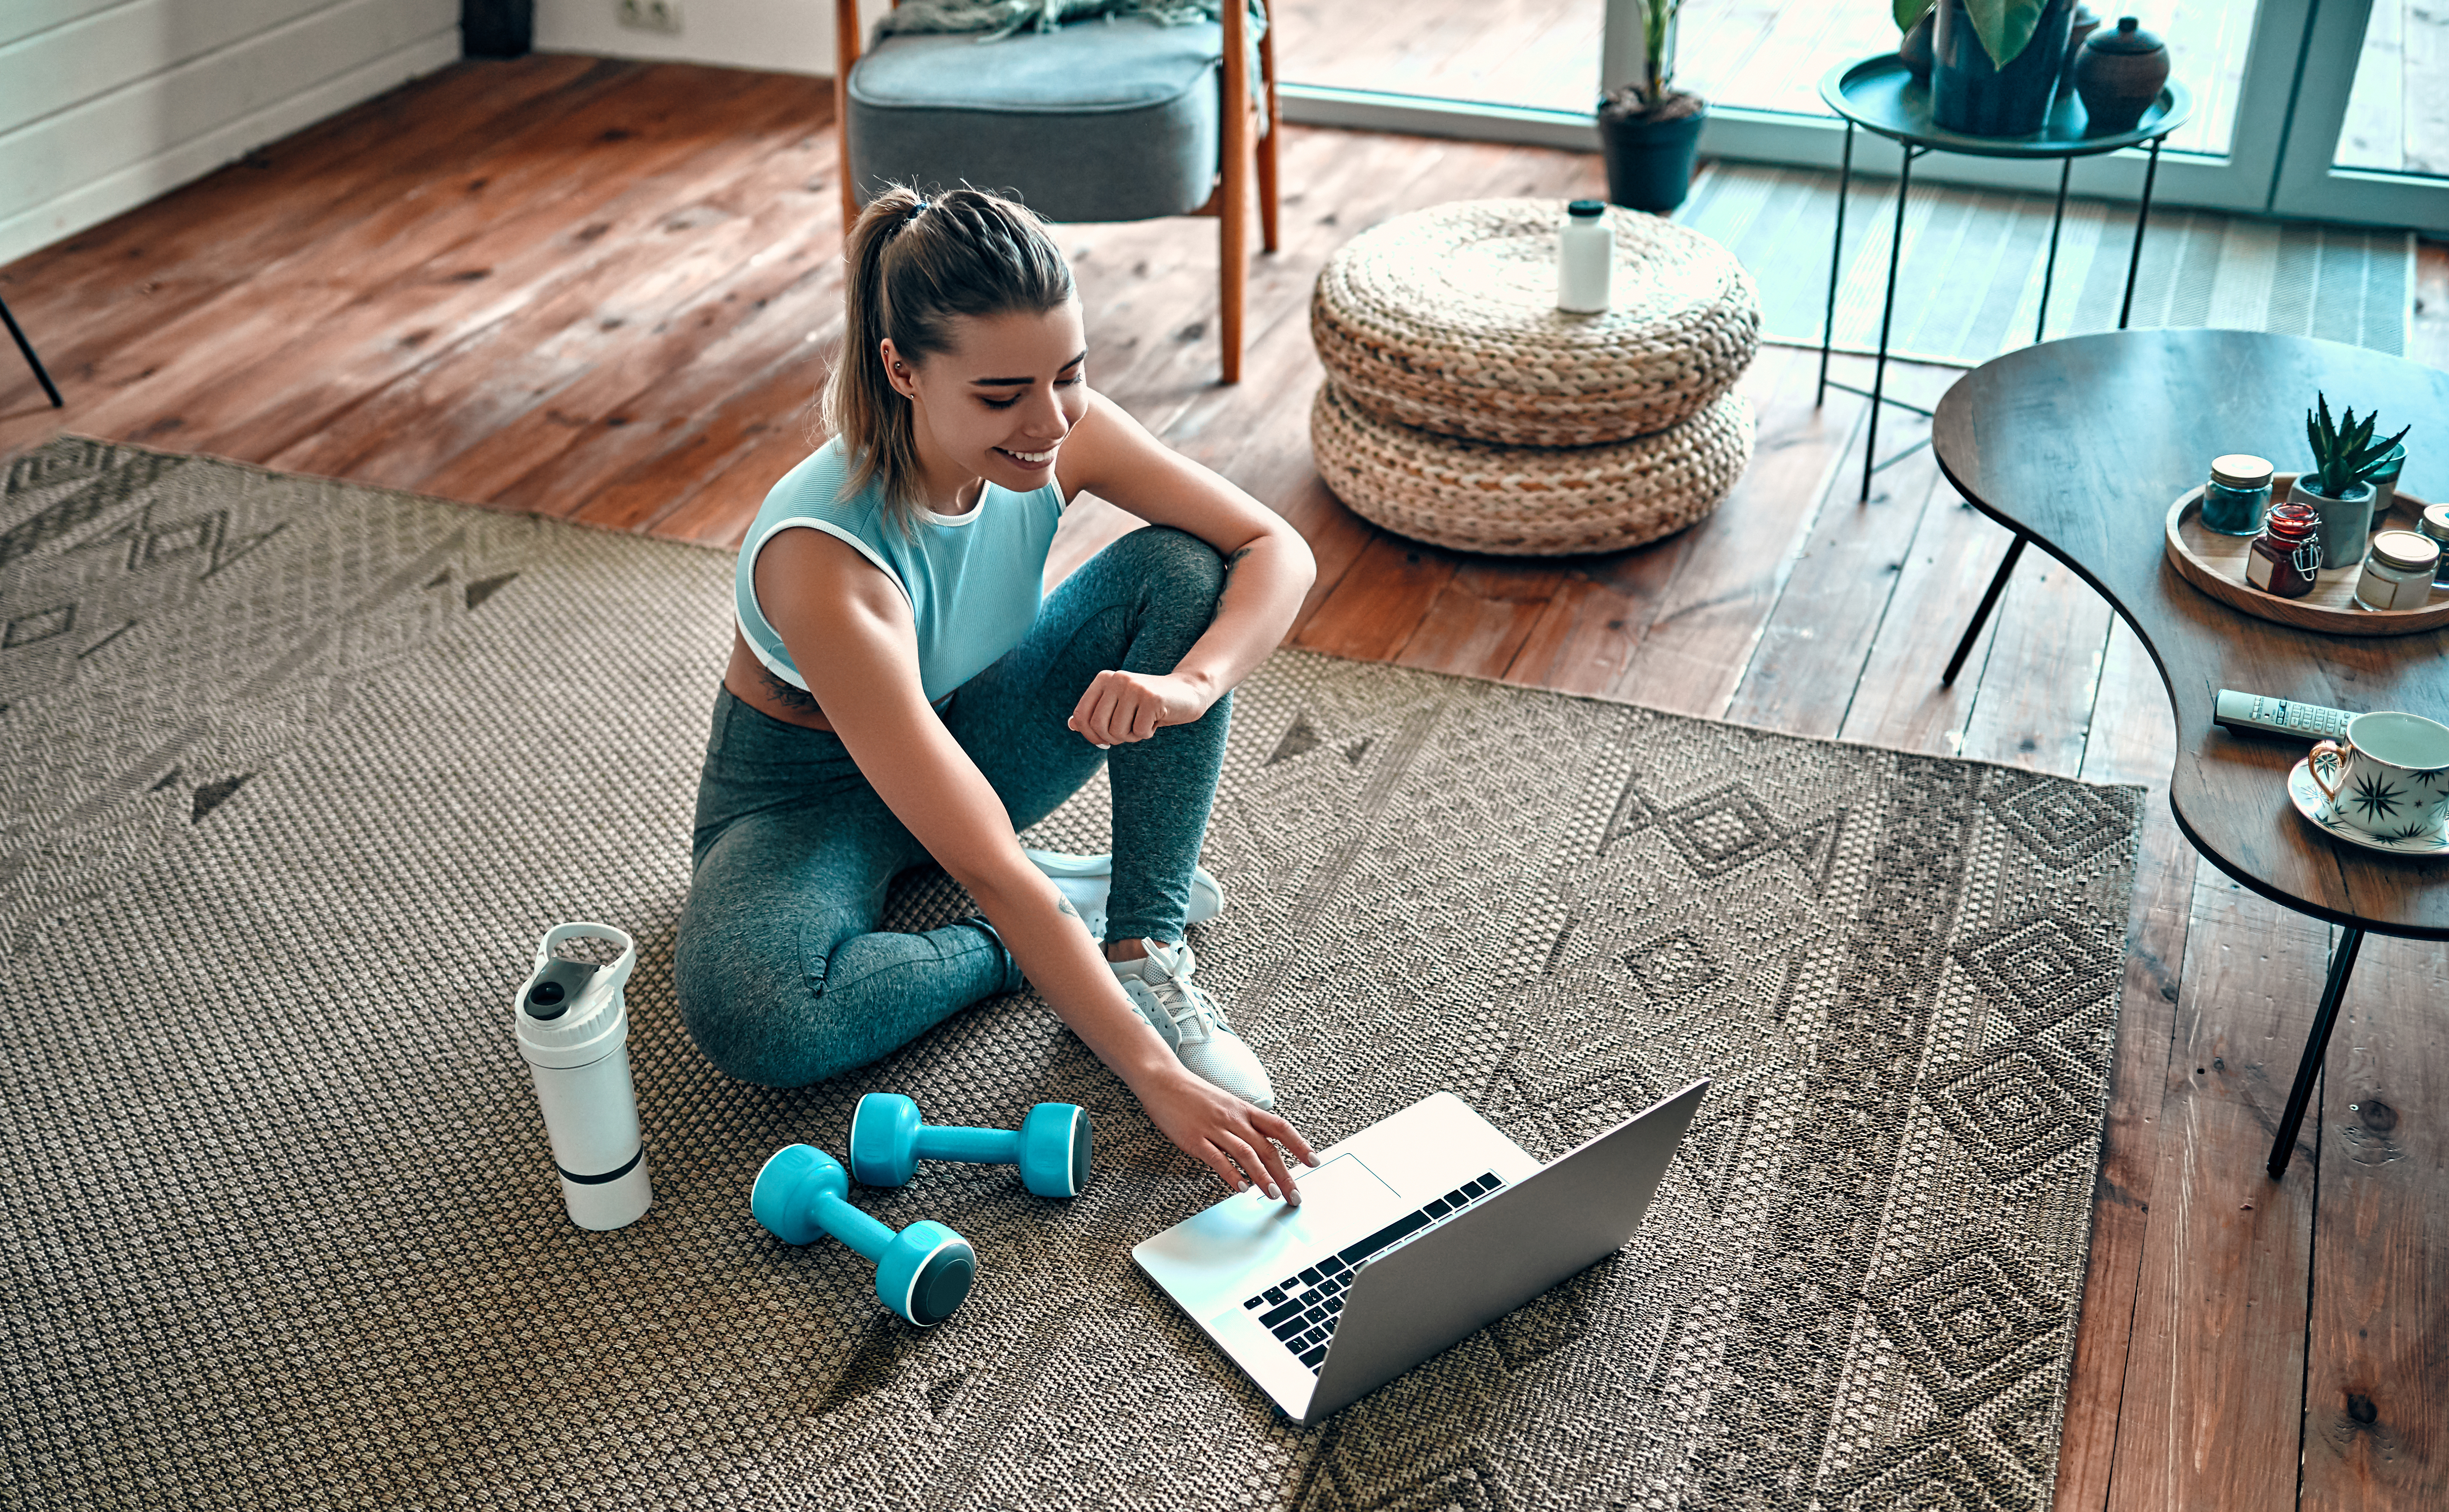 woman with exercise gear looking up workouts on laptop